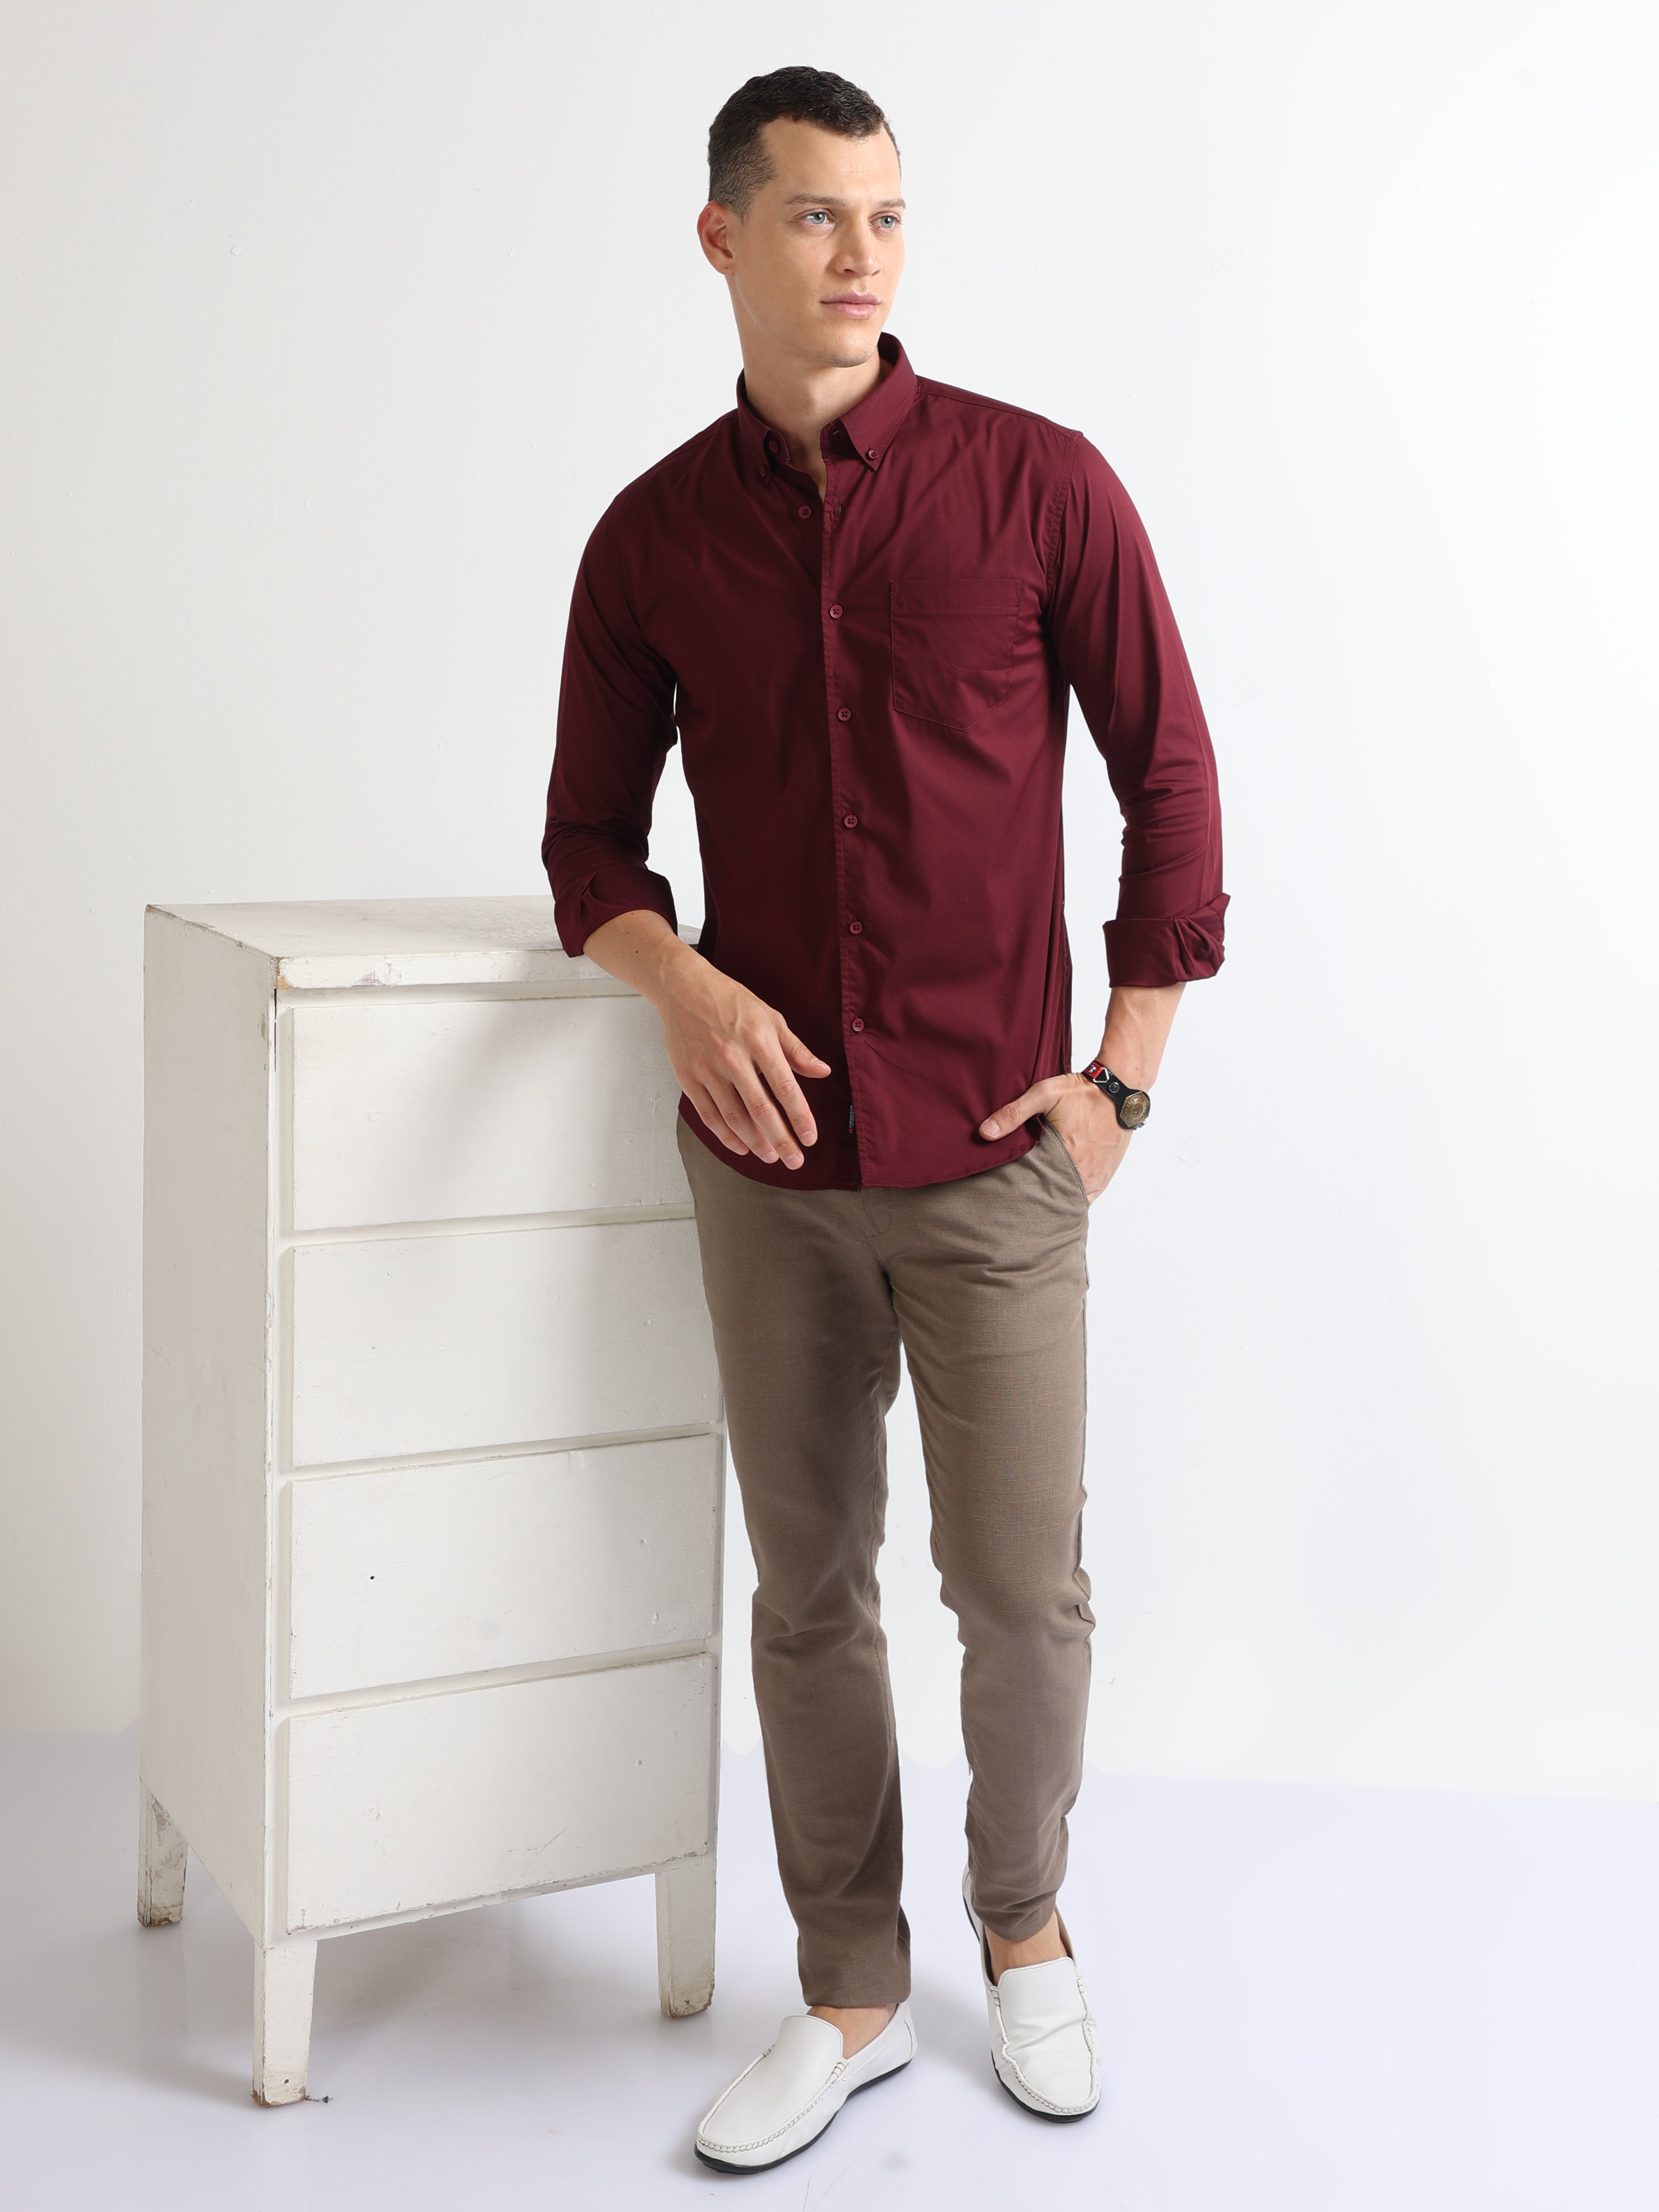 Buy Maroon Shirts For Men & Women At Best Prices Online